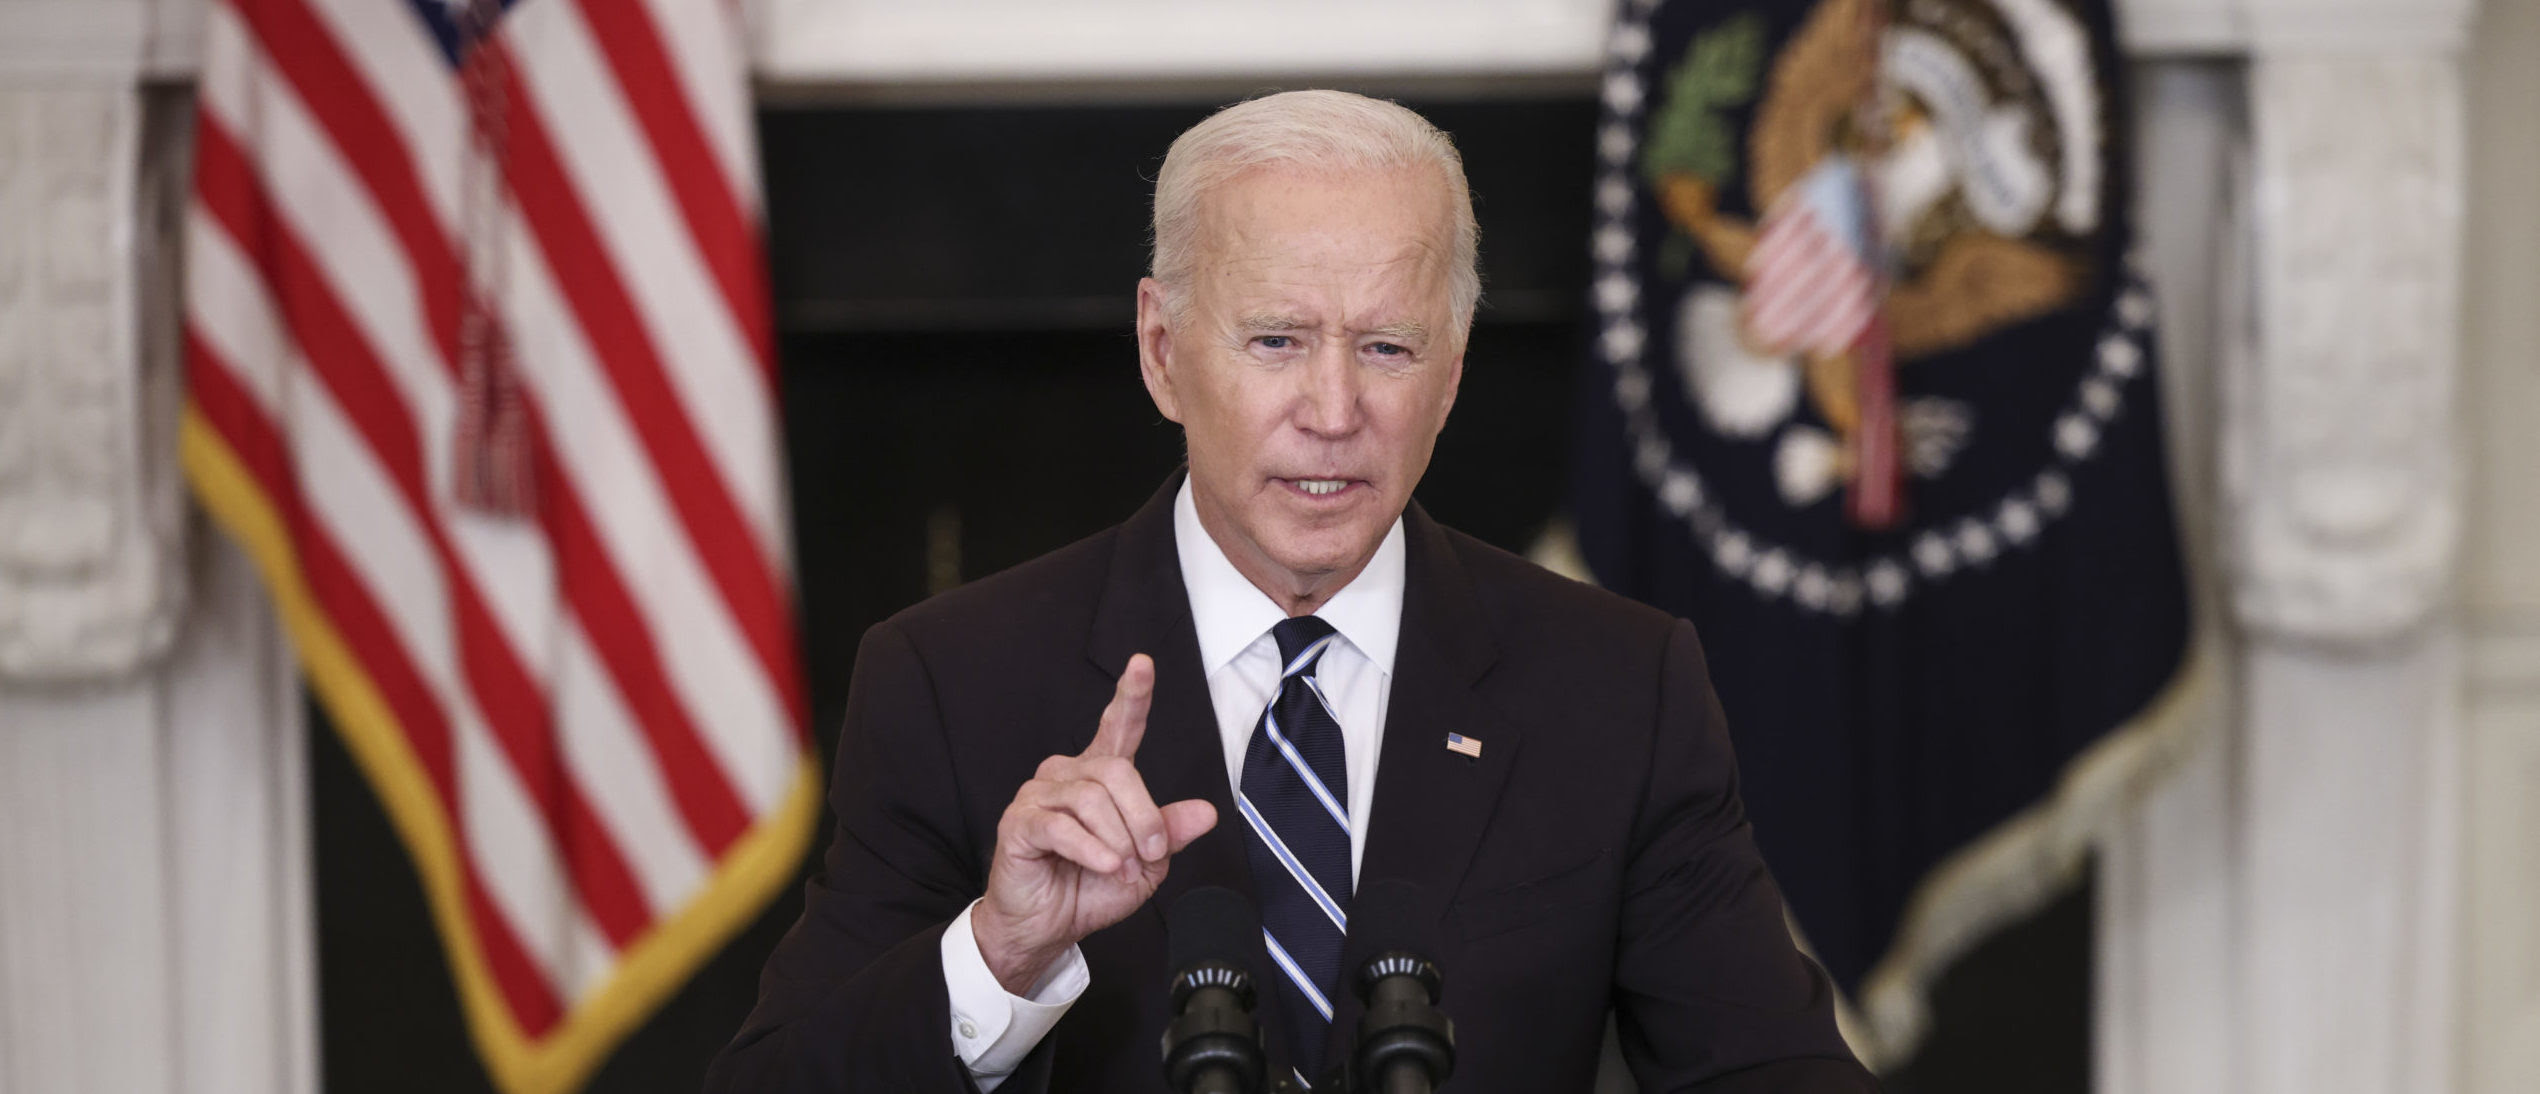 Federal Government Has 96.5% Compliance Rate With Biden’s Vaccine Mandate, According To Administration